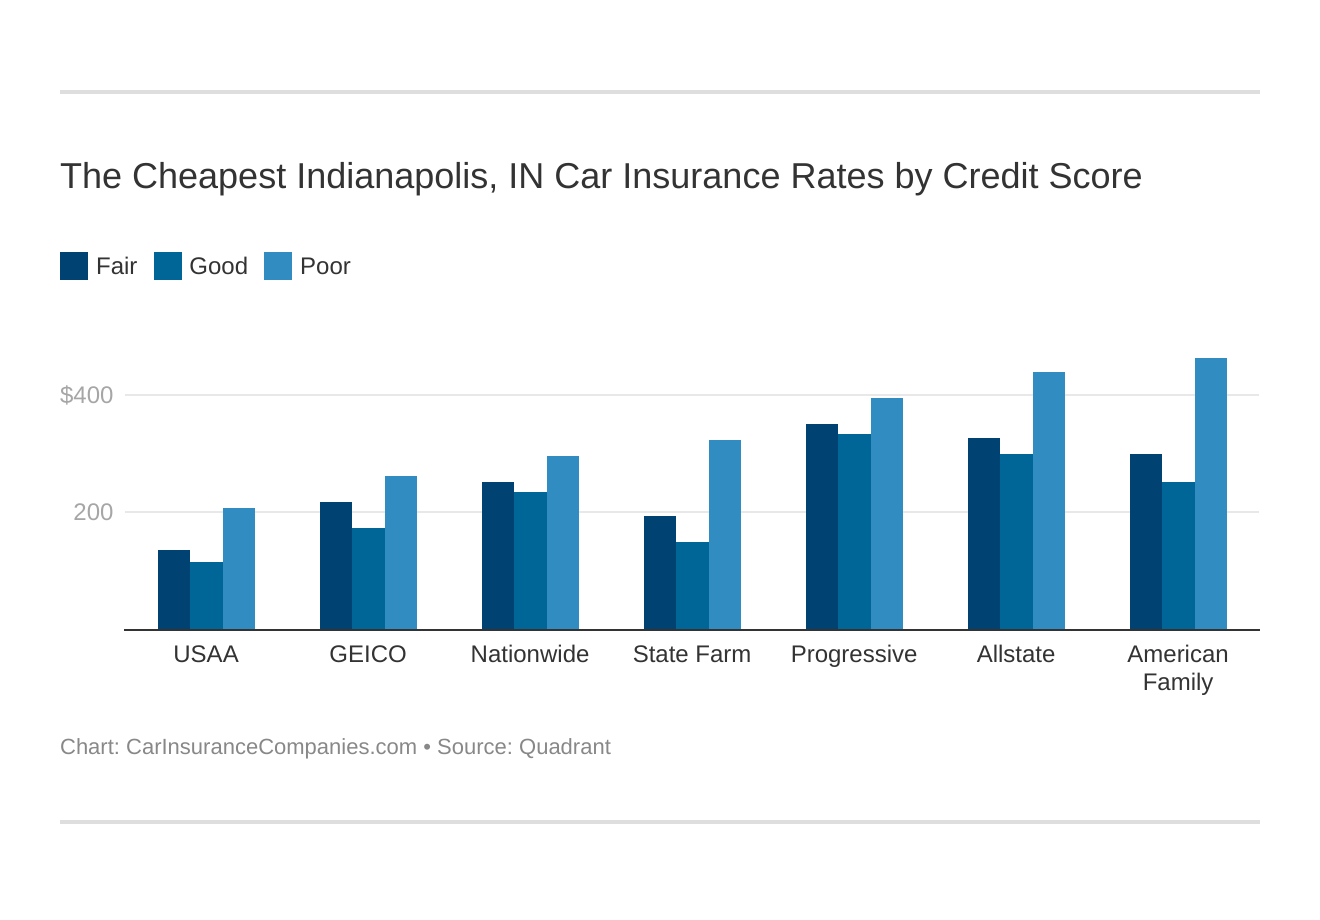 The Cheapest Indianapolis, IN Car Insurance Rates by Credit Score